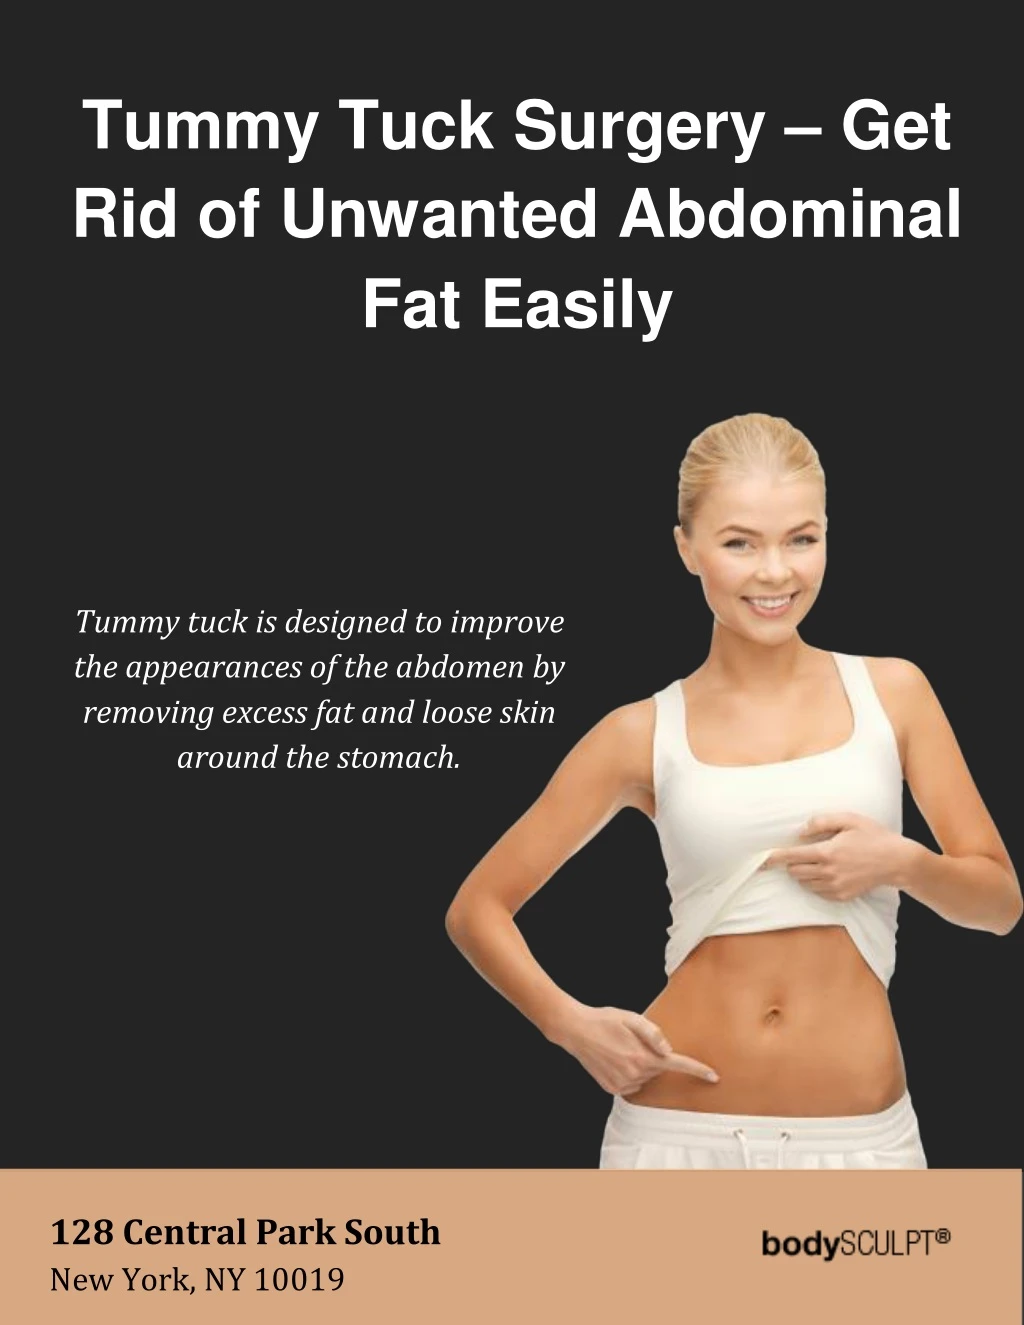 tummy tuck surgery get rid of unwanted abdominal